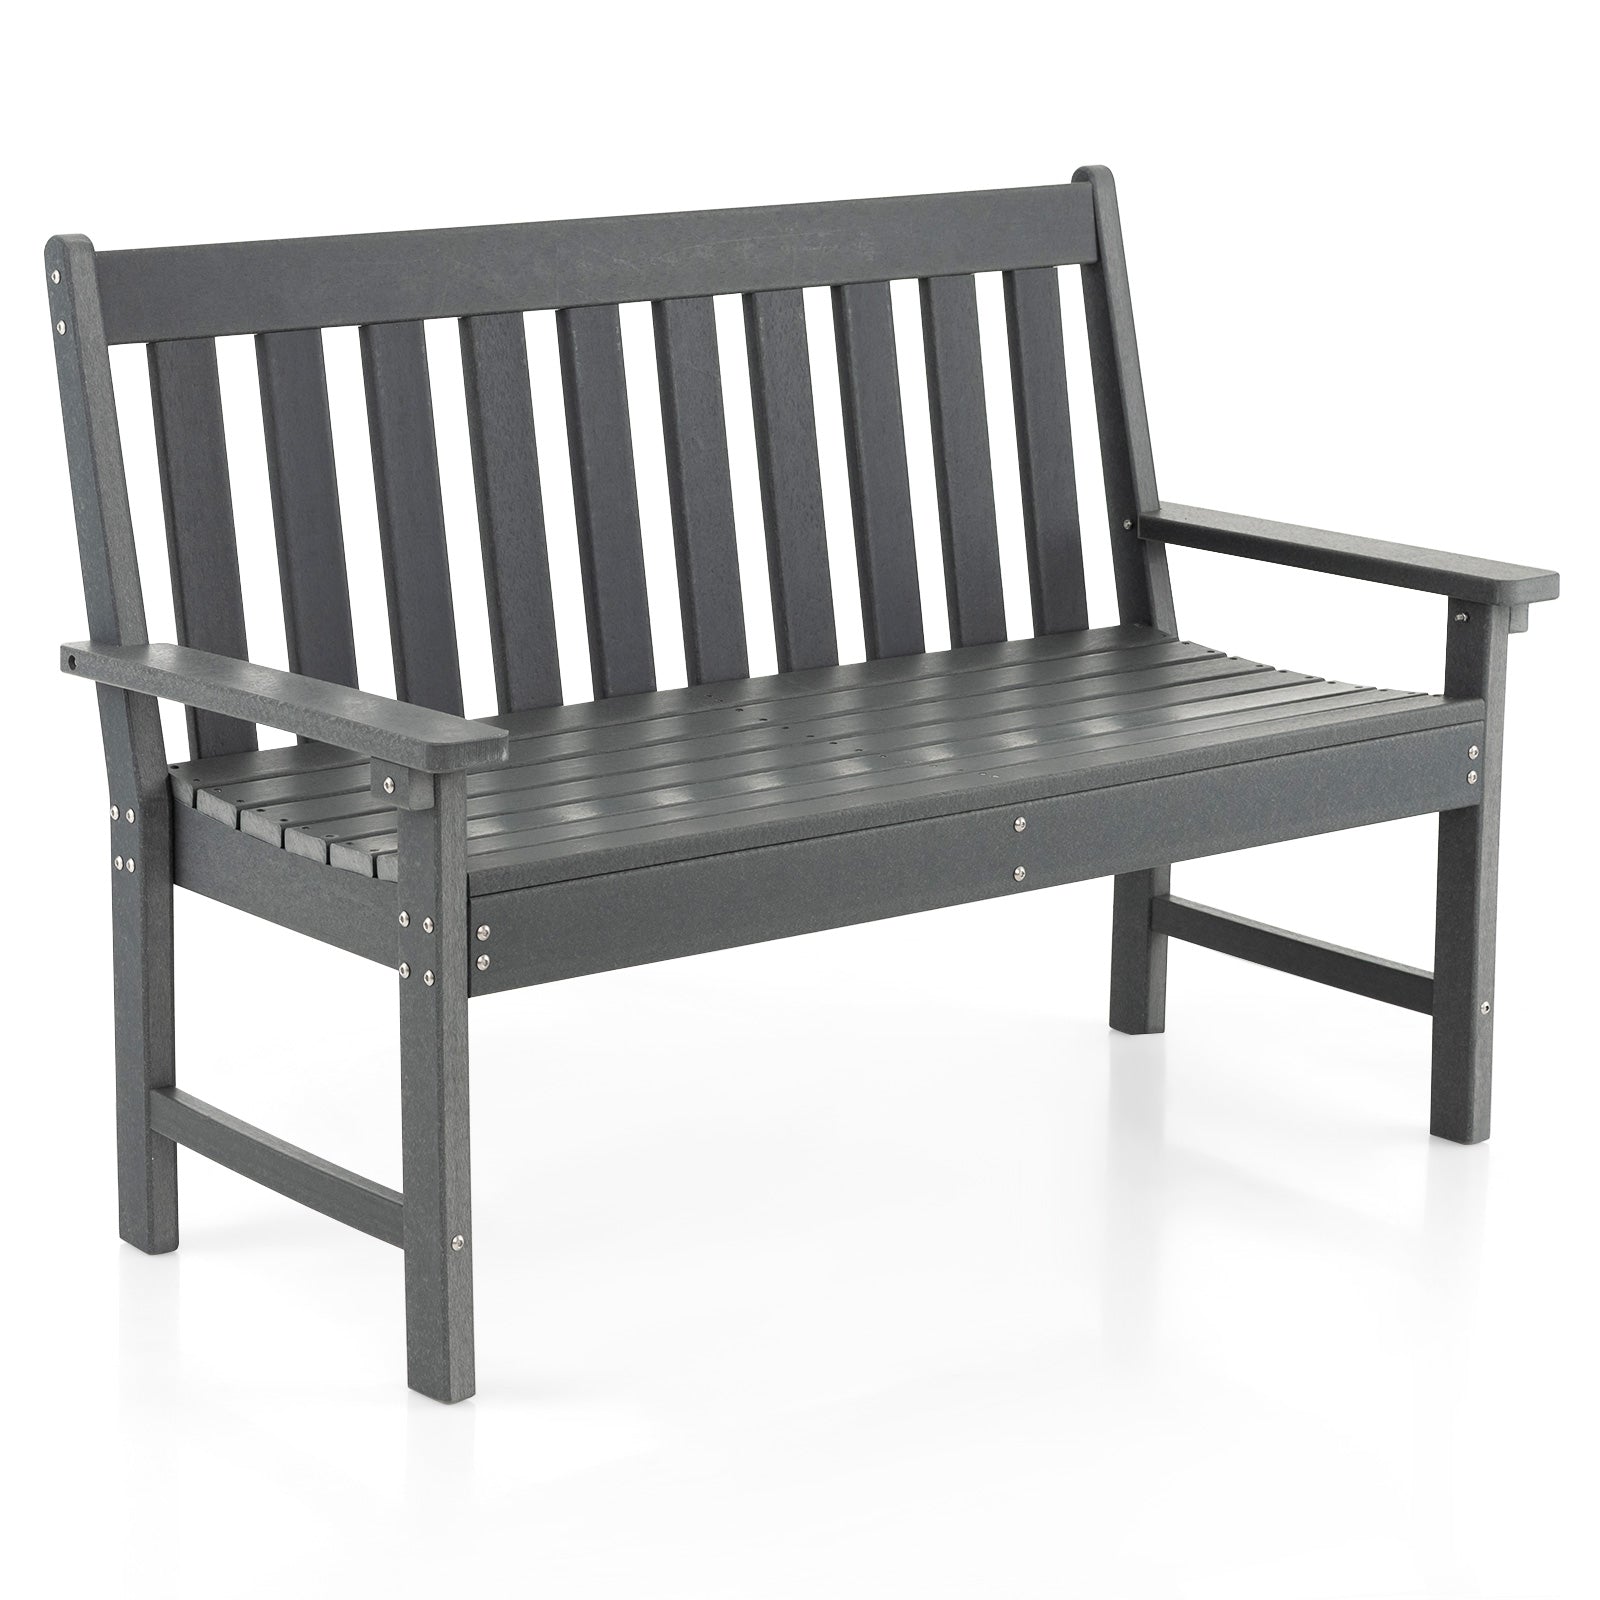 132 CM All-Weather HDPE Garden Bench with Backrest and Armrests-Grey